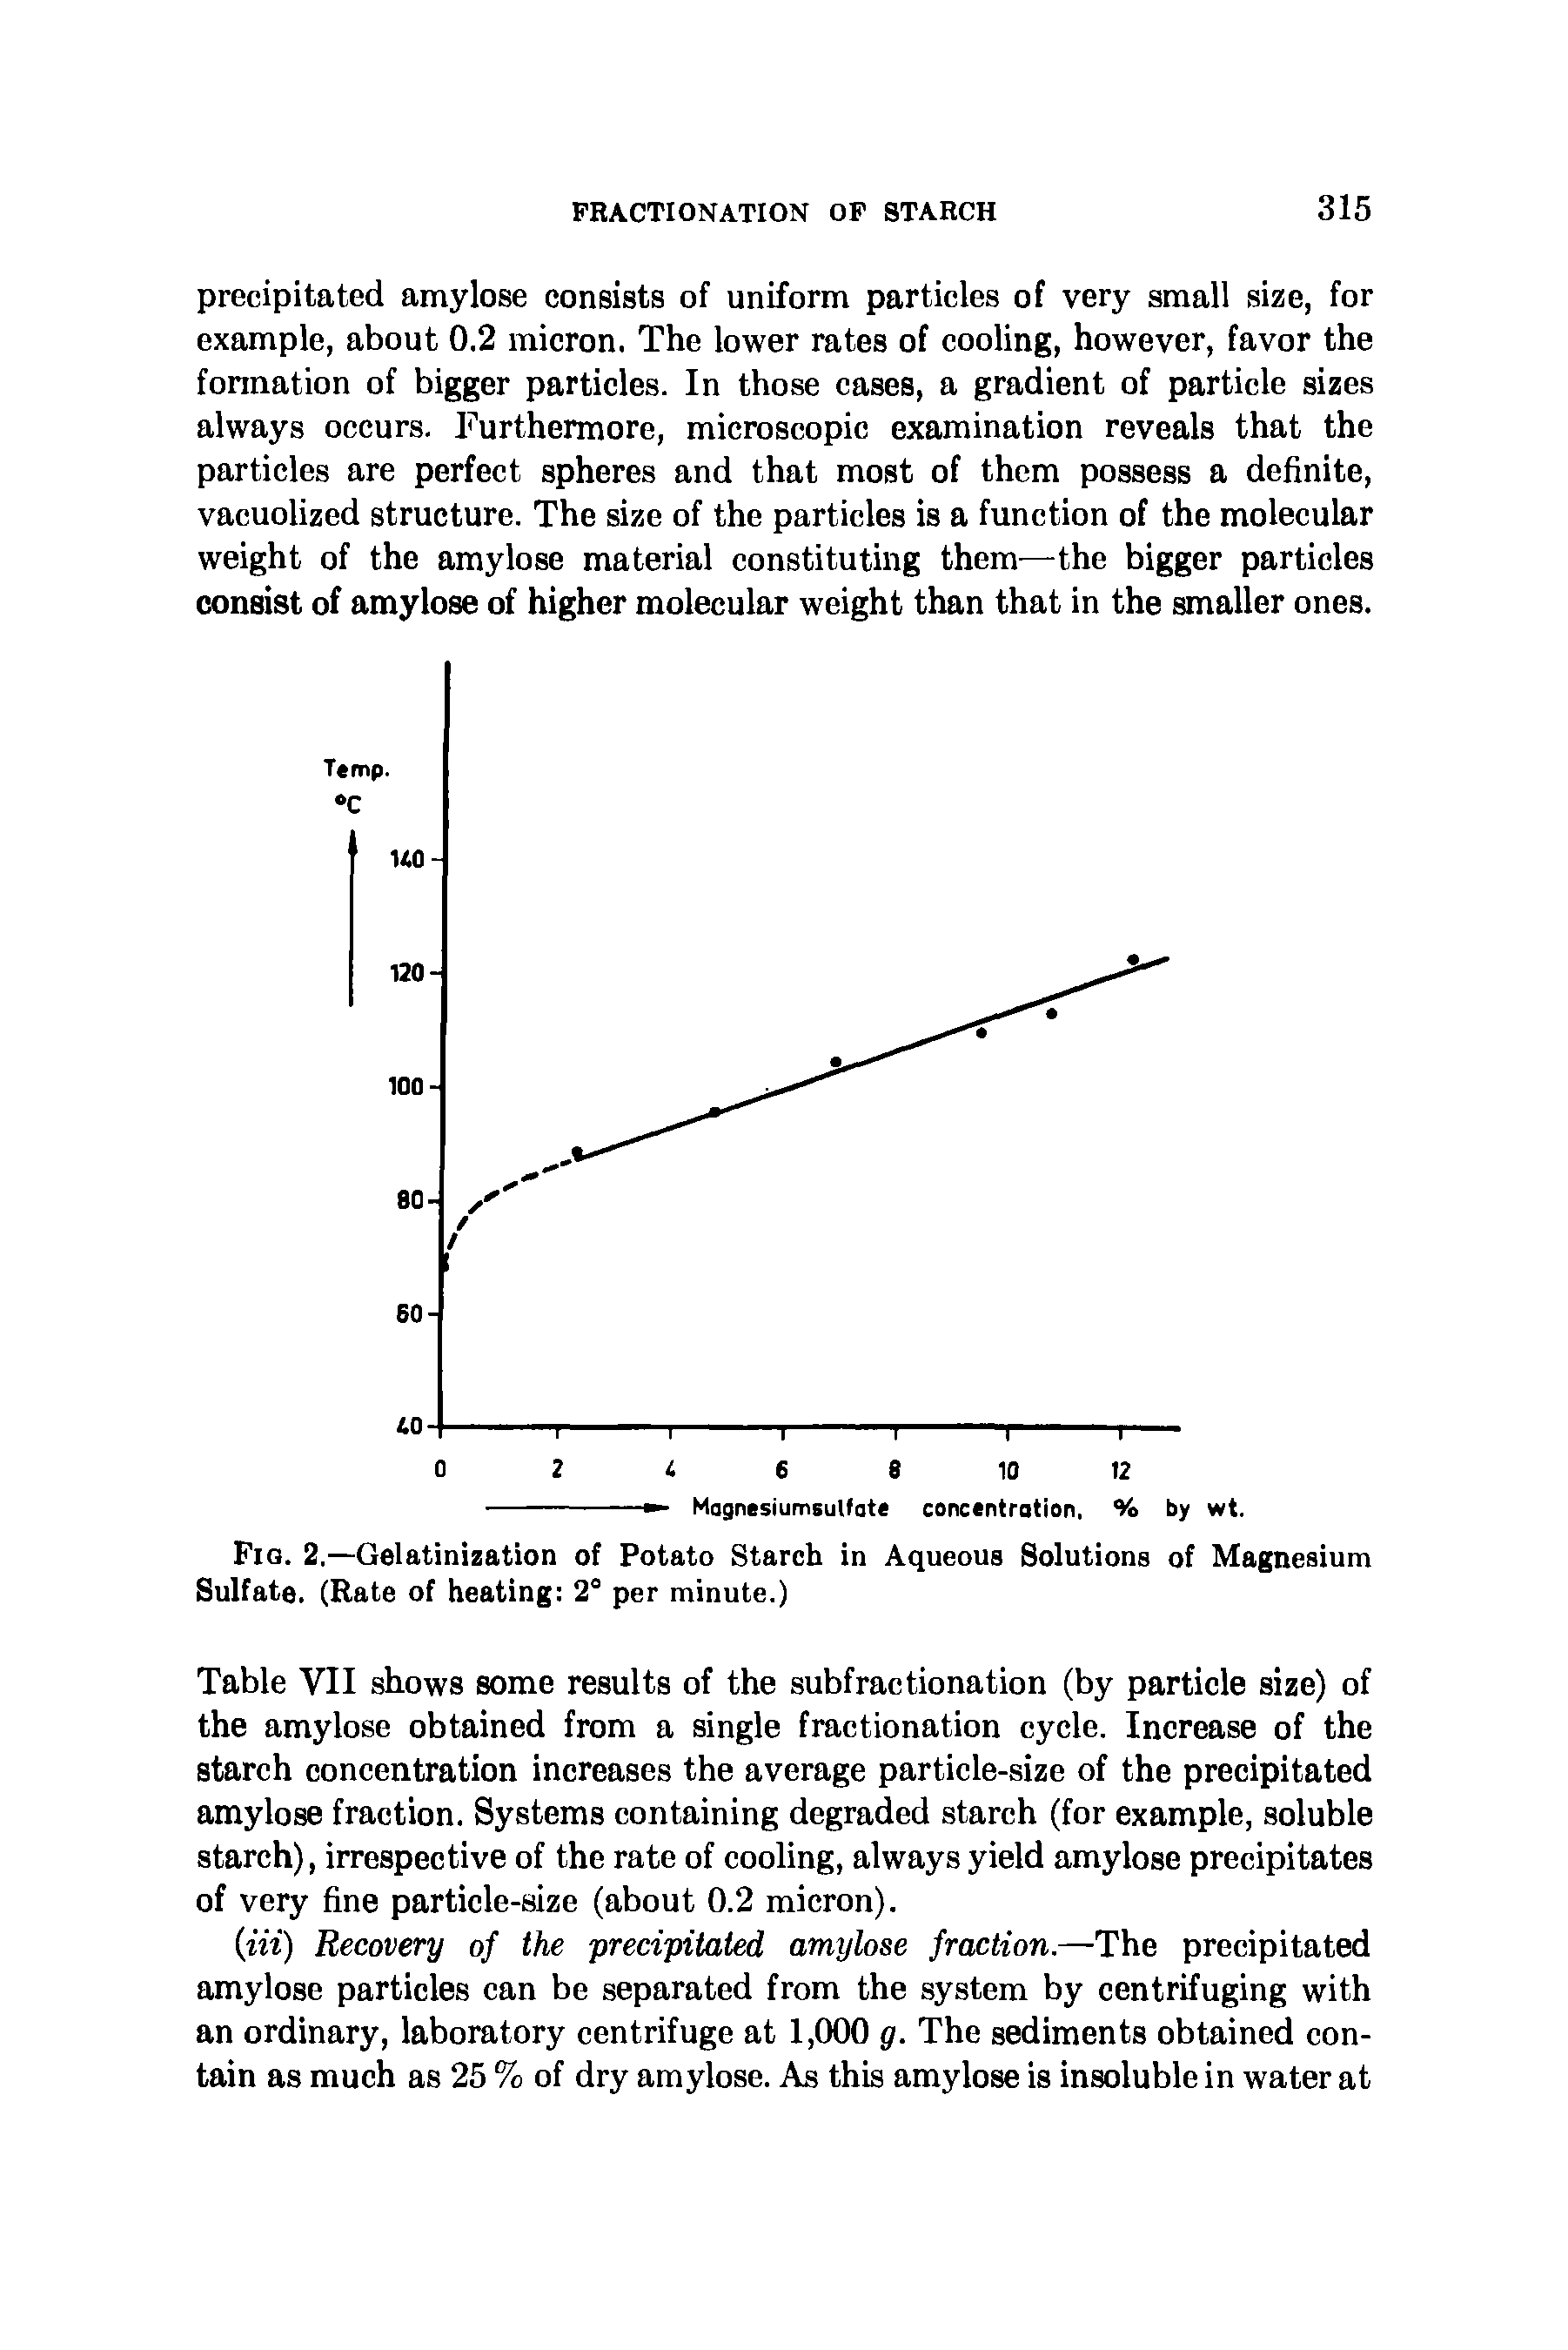 Table VII shows some results of the subfractionation (by particle size) of the amylose obtained from a single fractionation cycle. Increase of the starch concentration increases the average particle-size of the precipitated amylose fraction. Systems containing degraded starch (for example, soluble starch), irrespective of the rate of cooling, always yield amylose precipitates of very fine particle-size (about 0.2 micron).